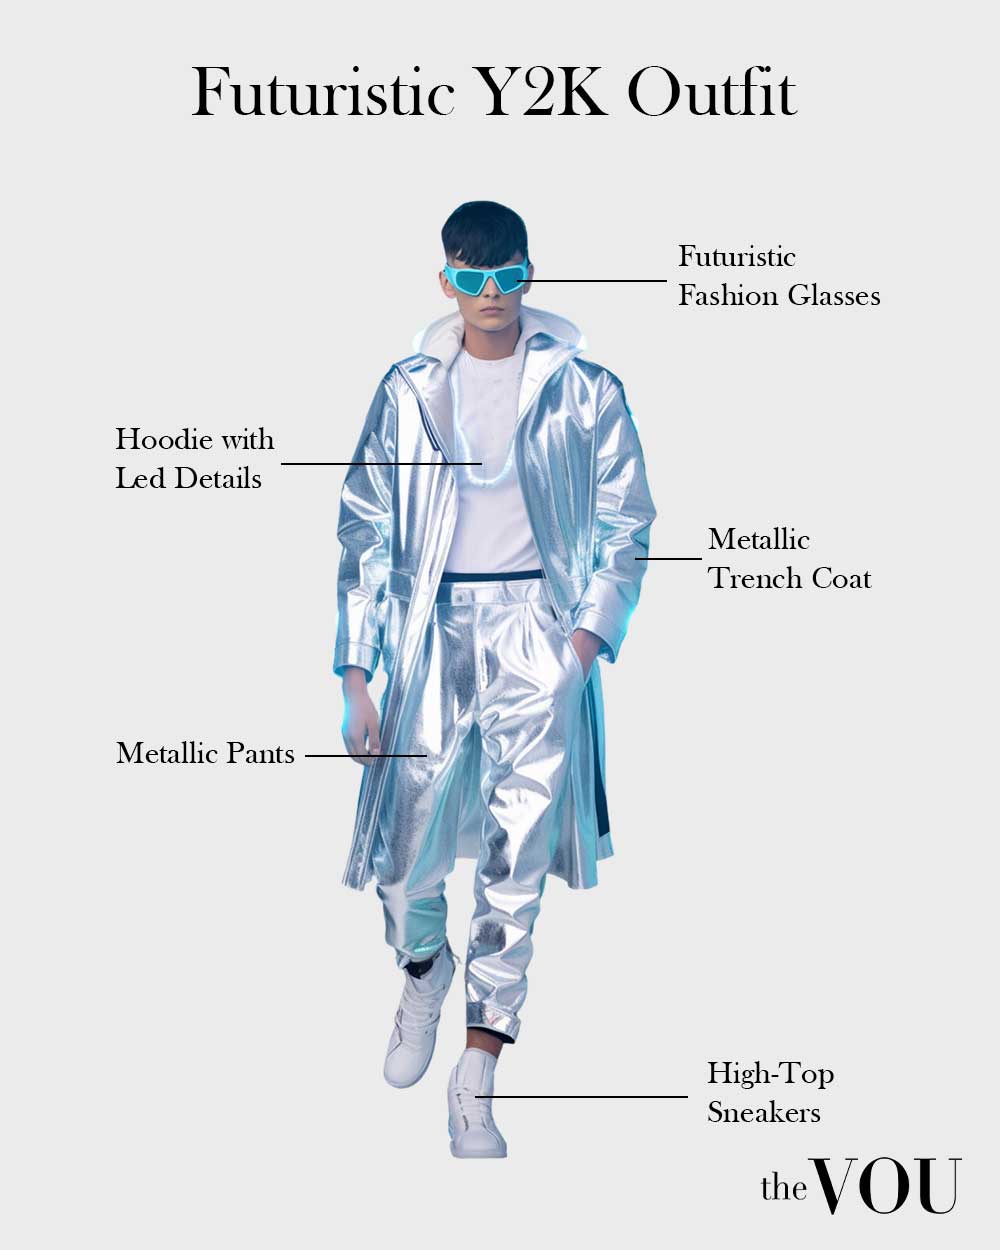 Futuristic Y2K Style outfit for men